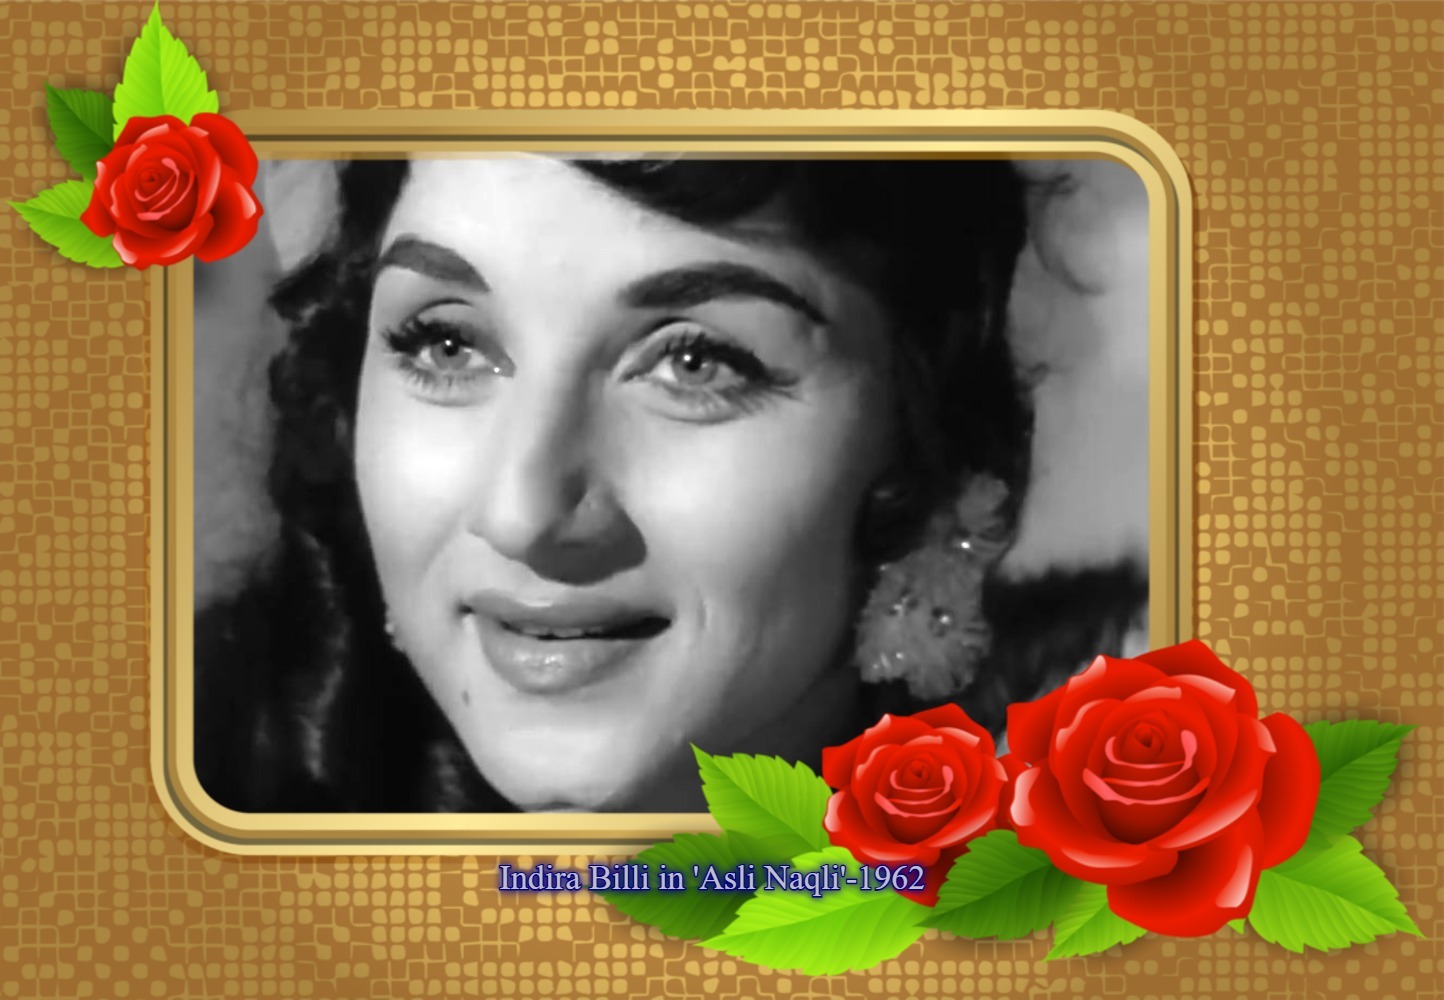 Read more about the article “Indira Billi- The Actress Who Was Miscast in Hindi Films”